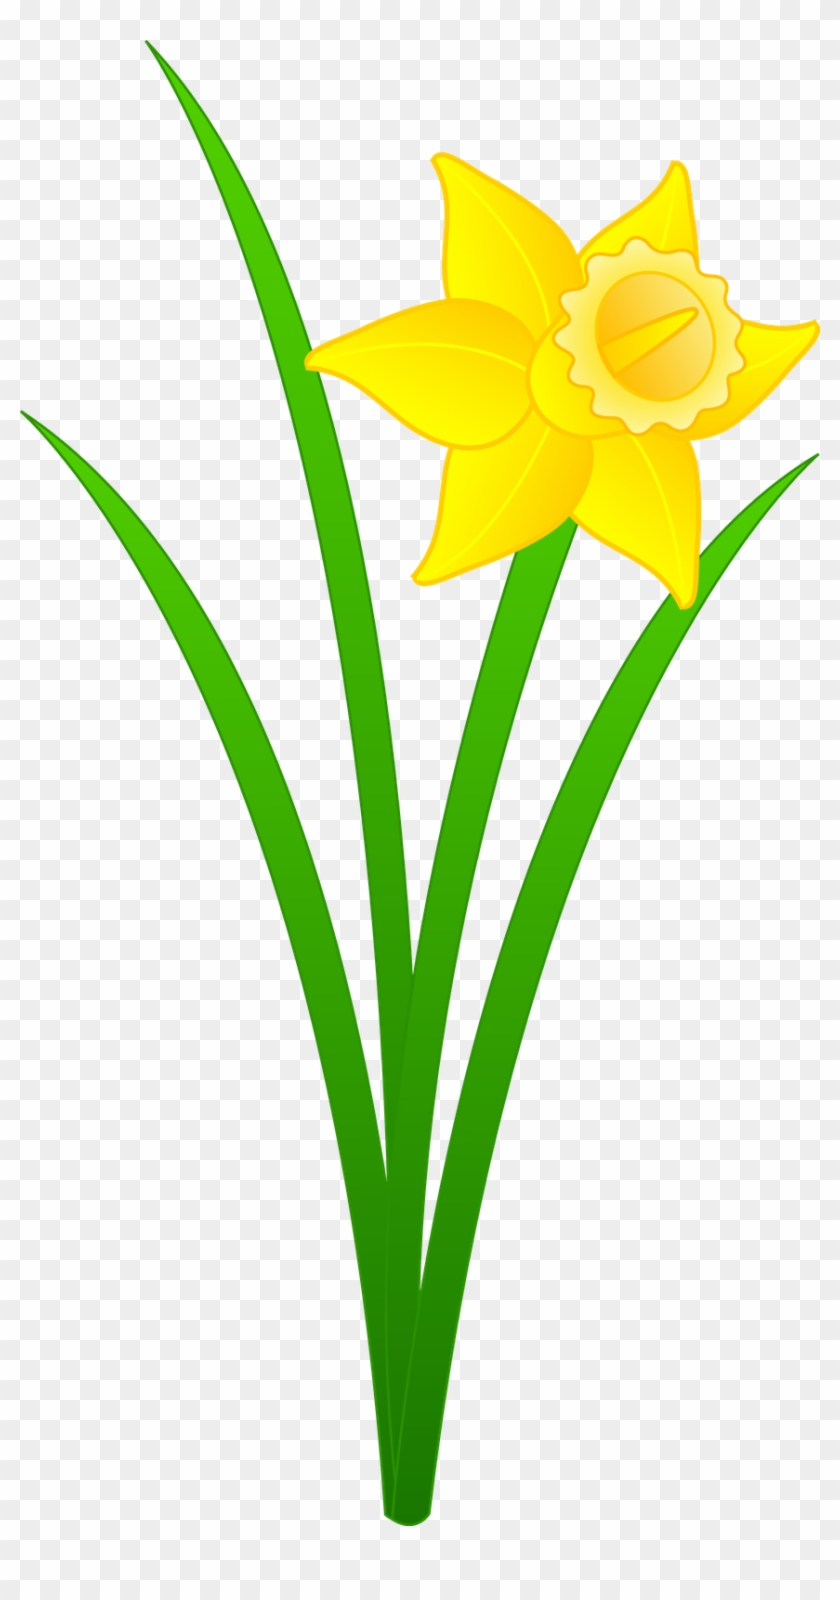 Hello And Happy St - Daffodil Flower Clip Art #1043630